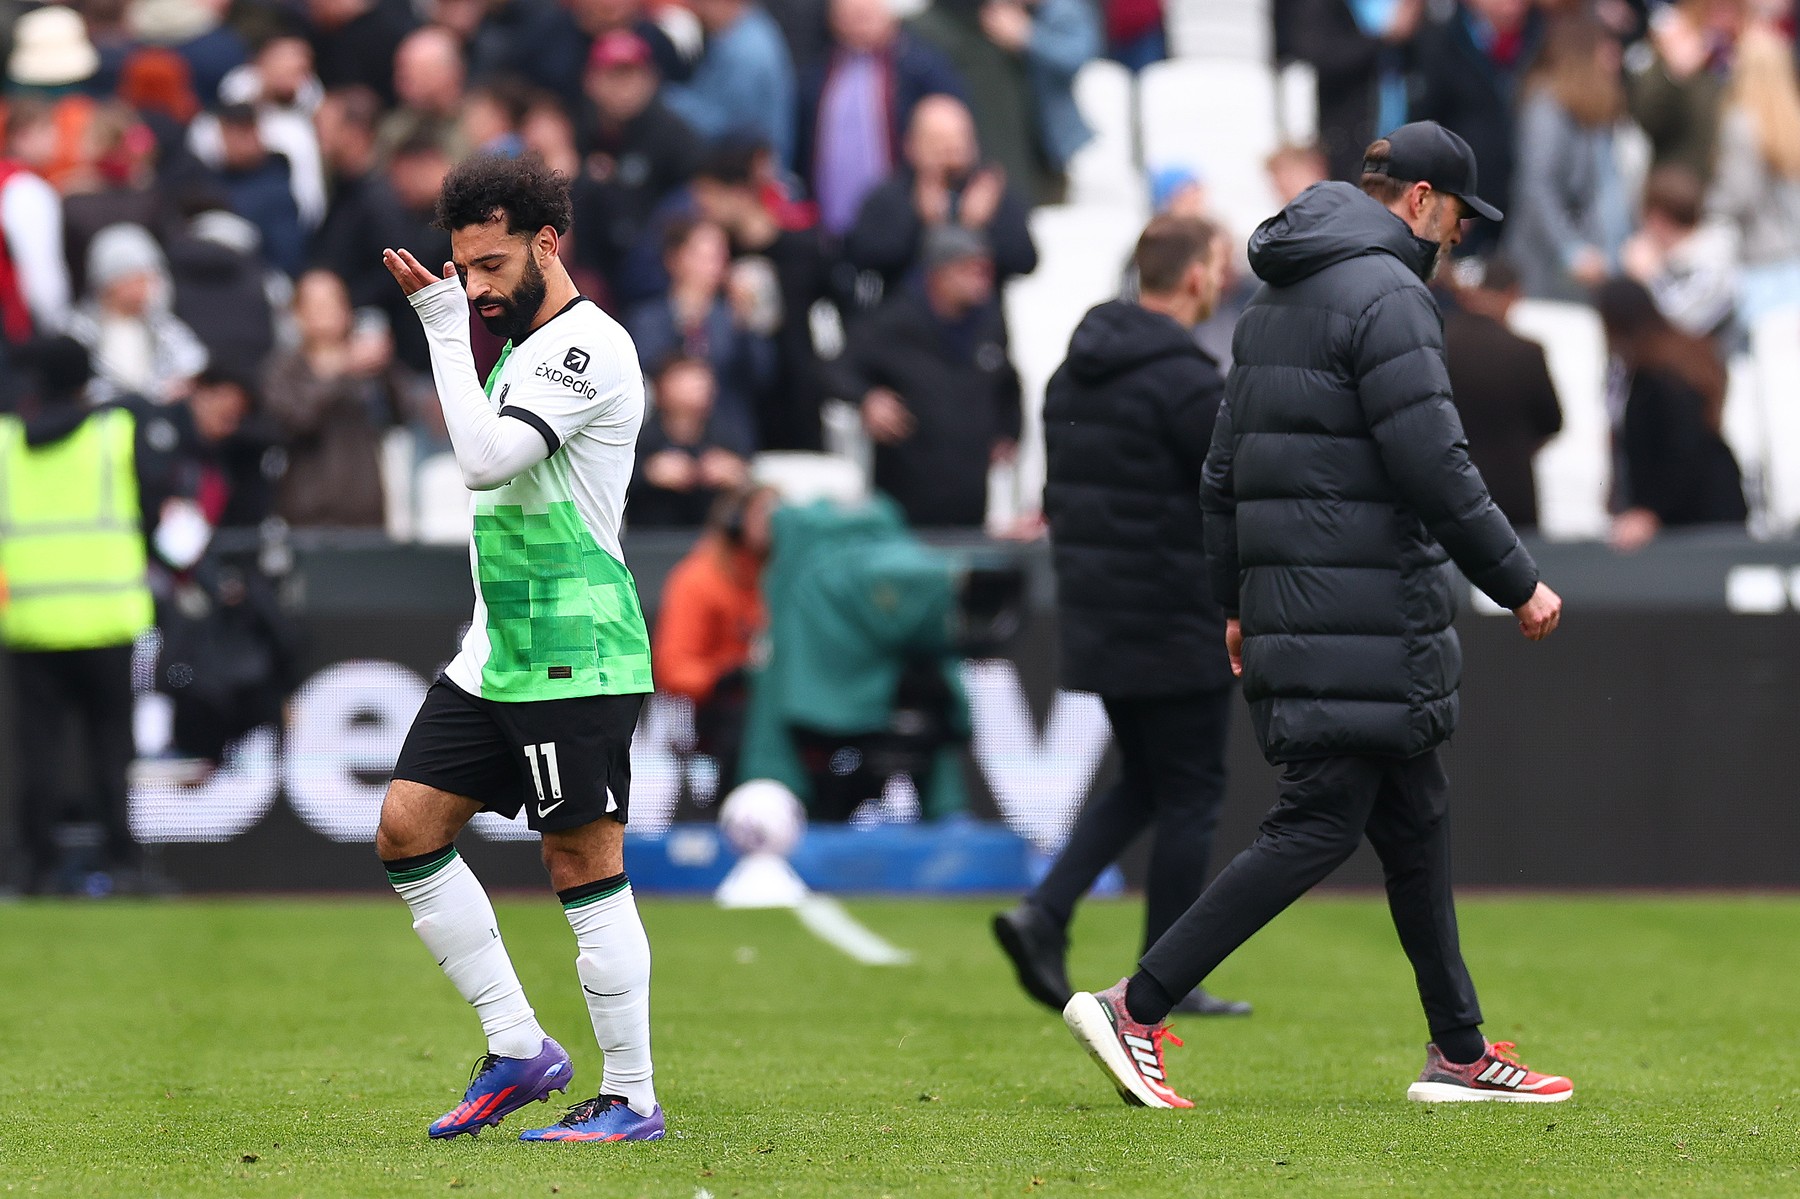 27th April 2024; London Stadium, London, England; Premier League Football, West Ham United versus Liverpool; A dejected Liverpool Manager Jurgen Klopp ignores Mohamed Salah after the 2-2 draw,Image: 868364373, License: Rights-managed, Restrictions: , Model Release: no, Credit line: Shaun Brooks / Actionplus / Profimedia